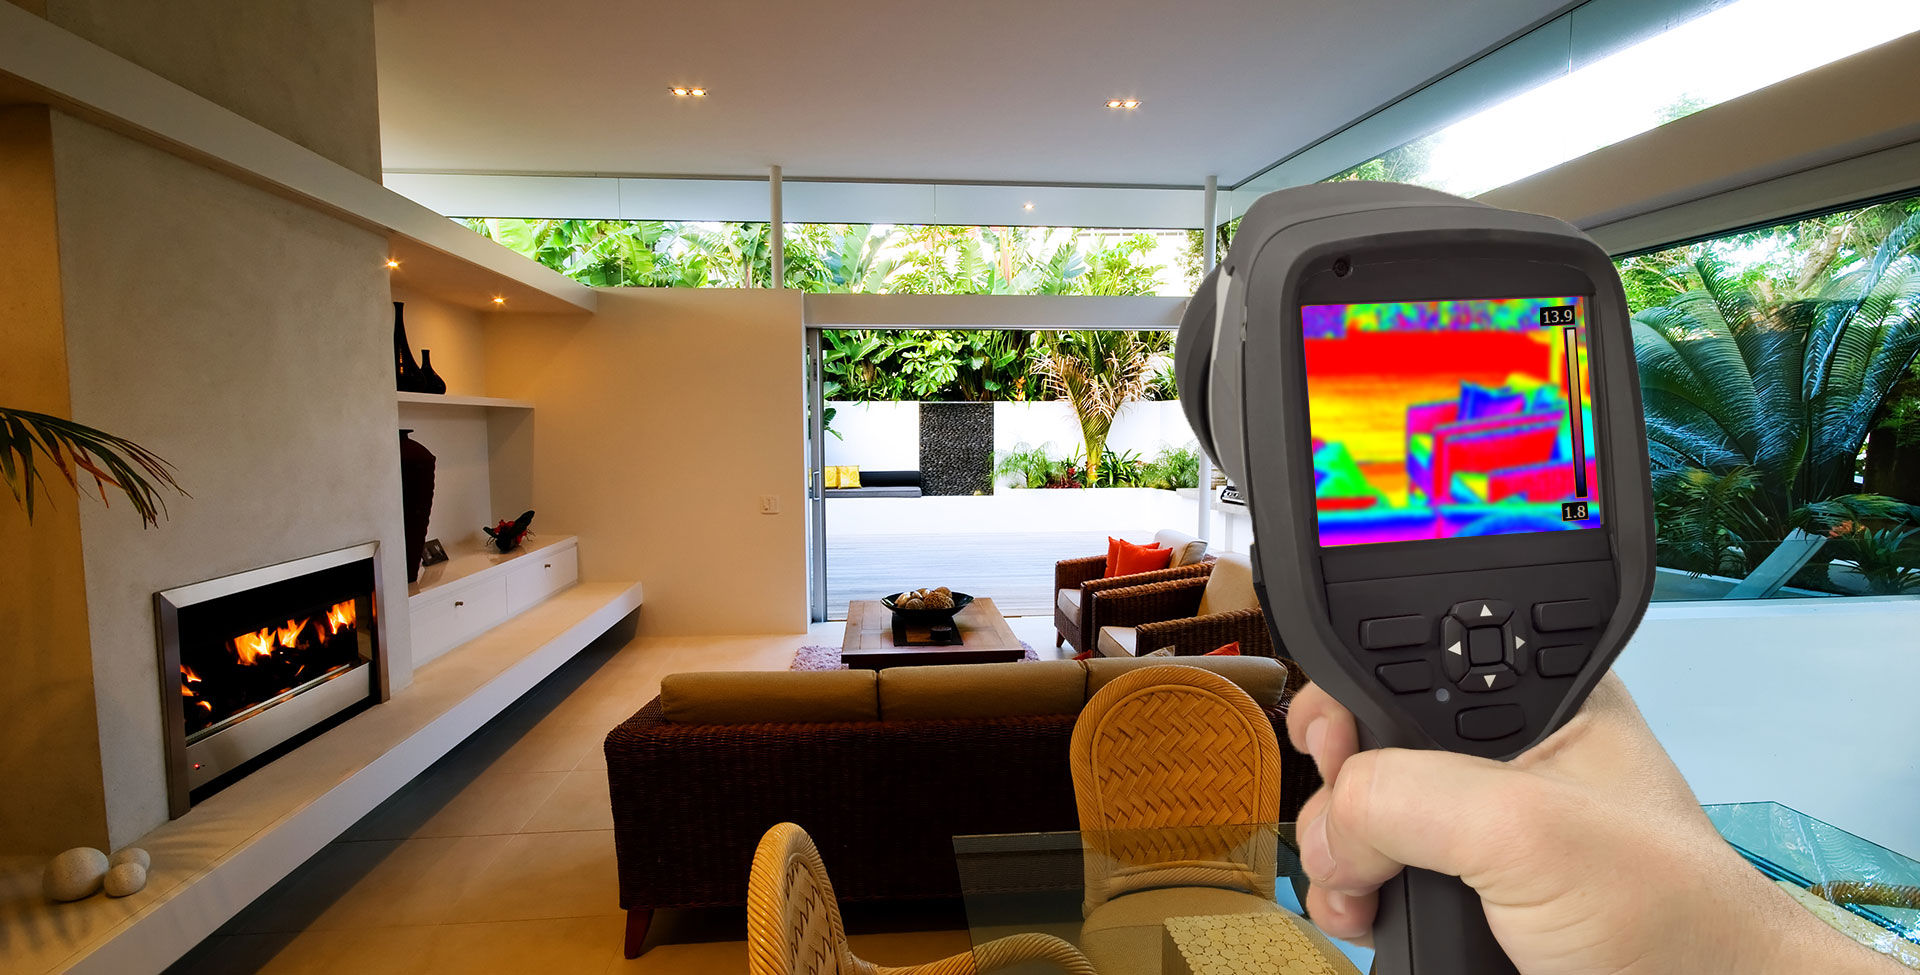 Thermal imaging building inspection